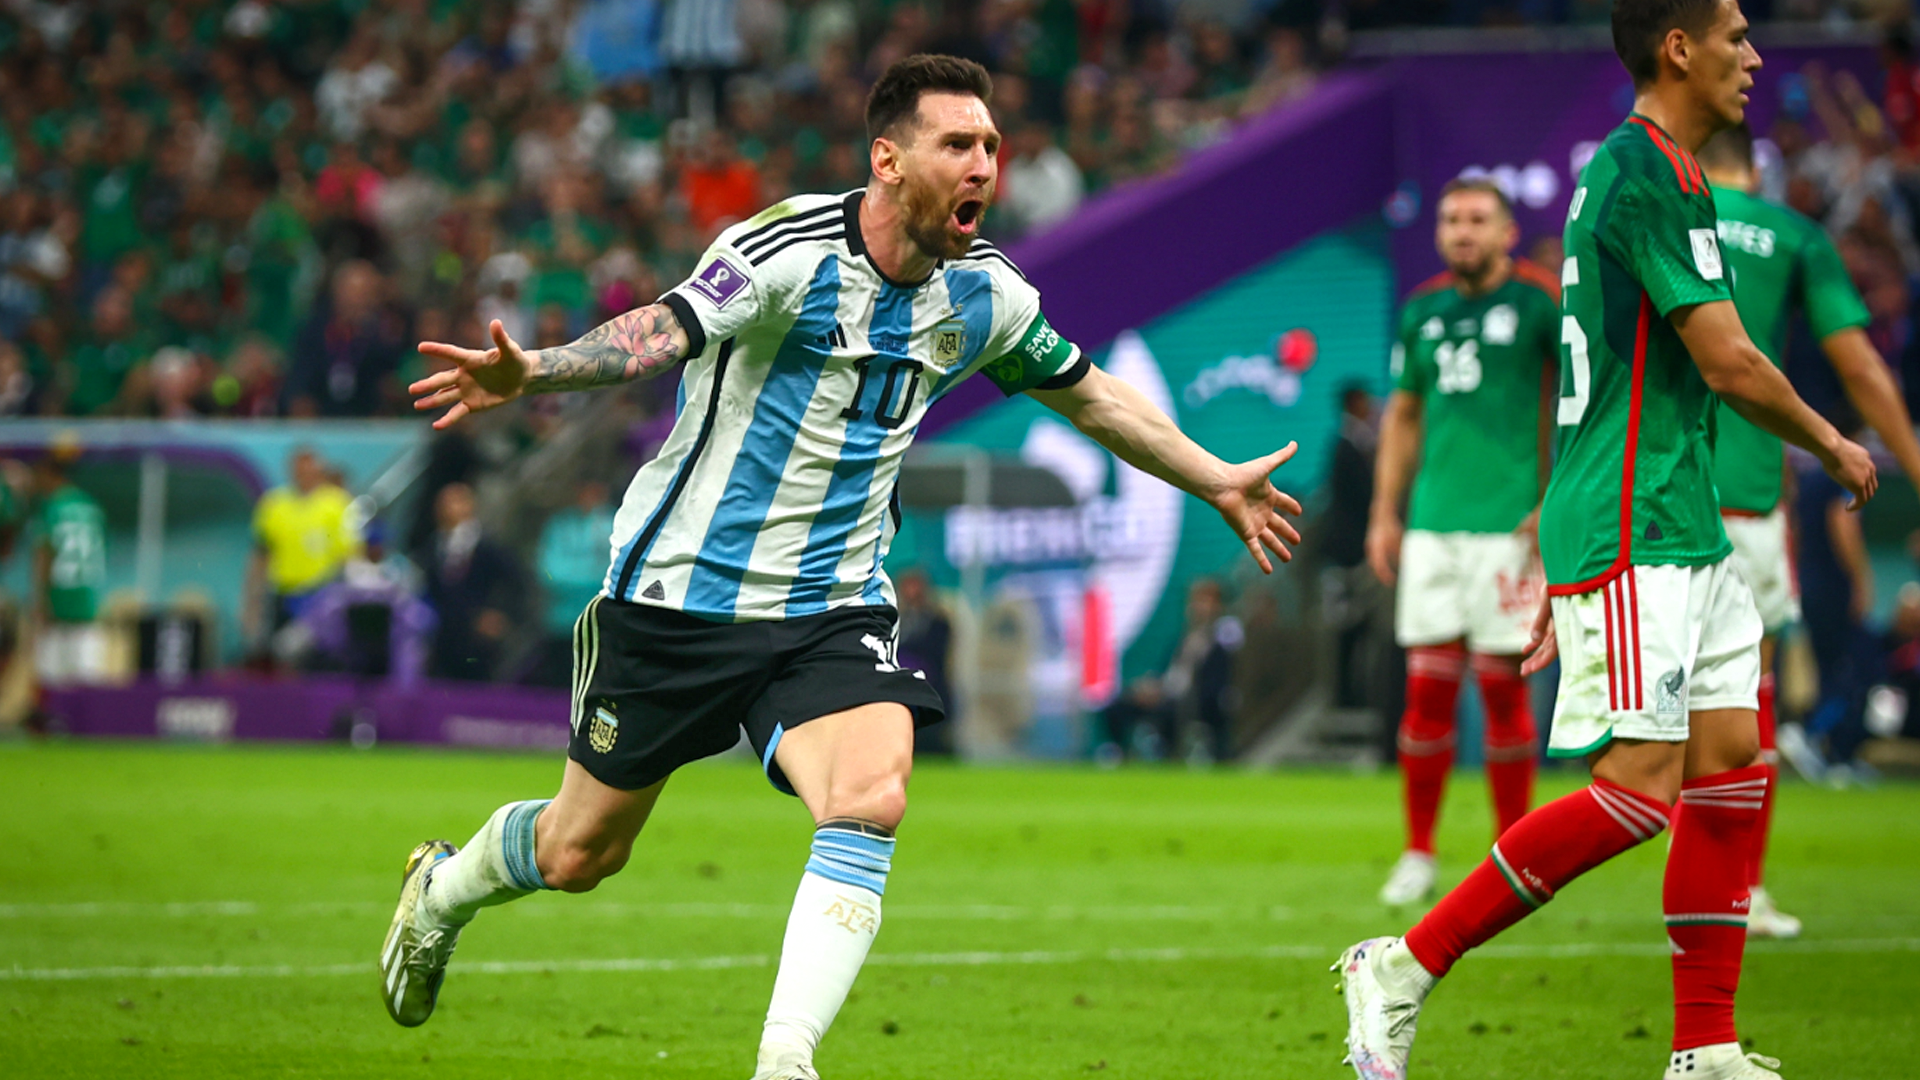 2022 FIFA World Cup: Argentina 2-0 Mexico